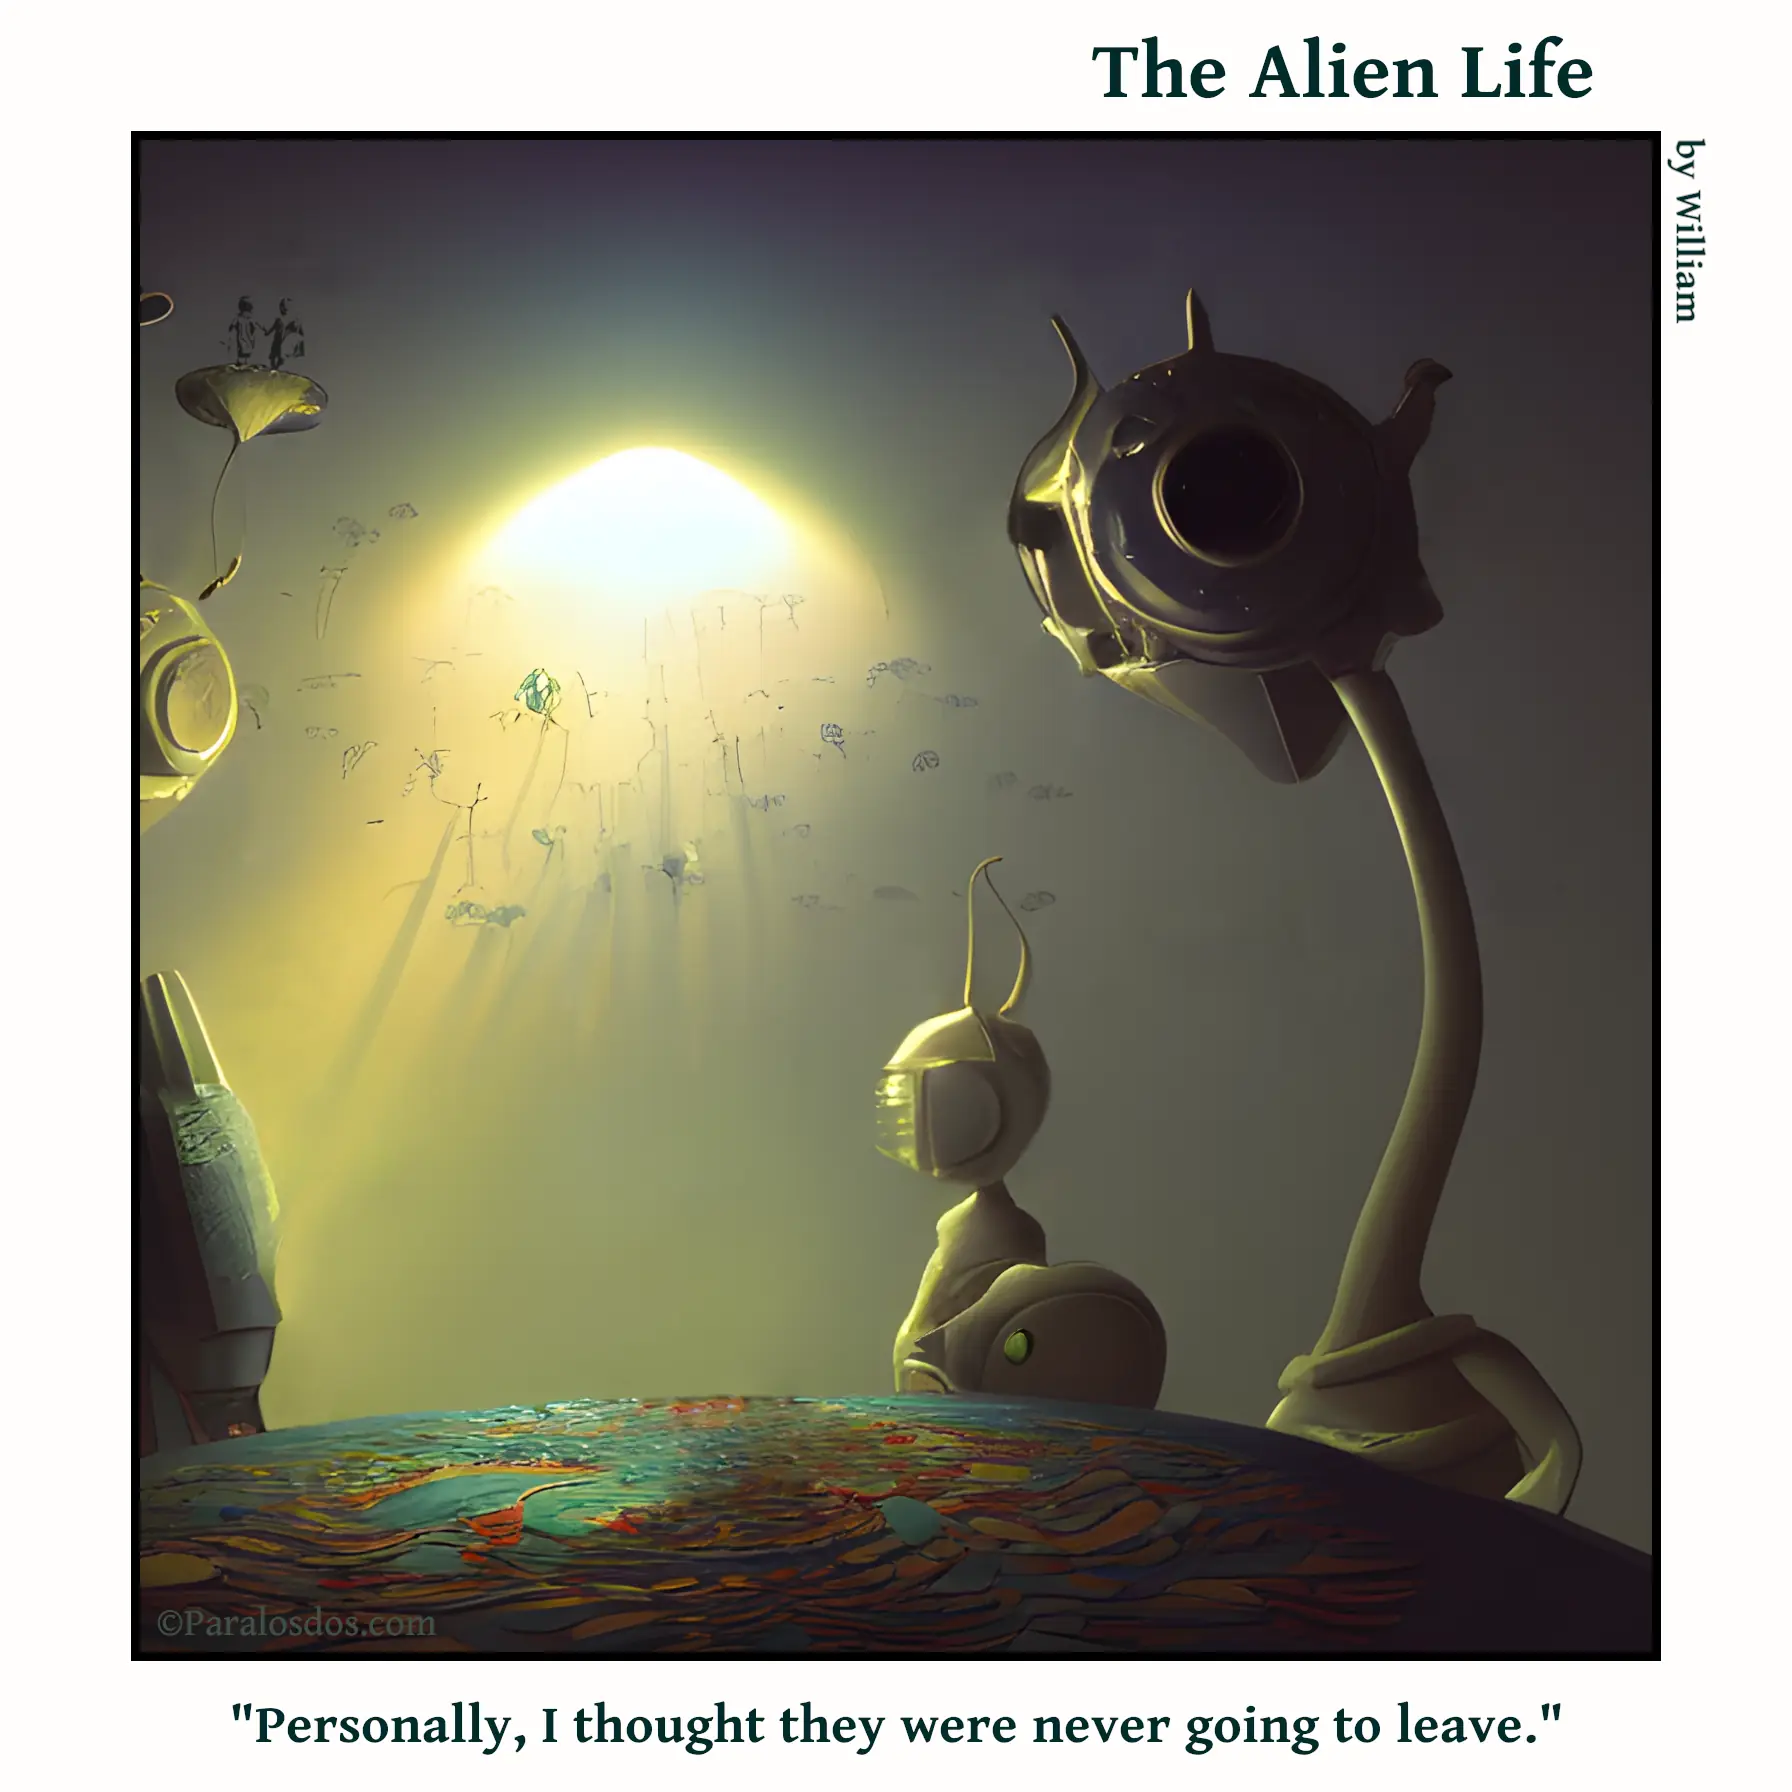 The Alien Life, one panel Comic. Some weird aliens are standing around a table watching a bunch of creatures fly out of a sunlit opening in the ceiling. The caption reads: "Personally, I thought they were never going to leave."